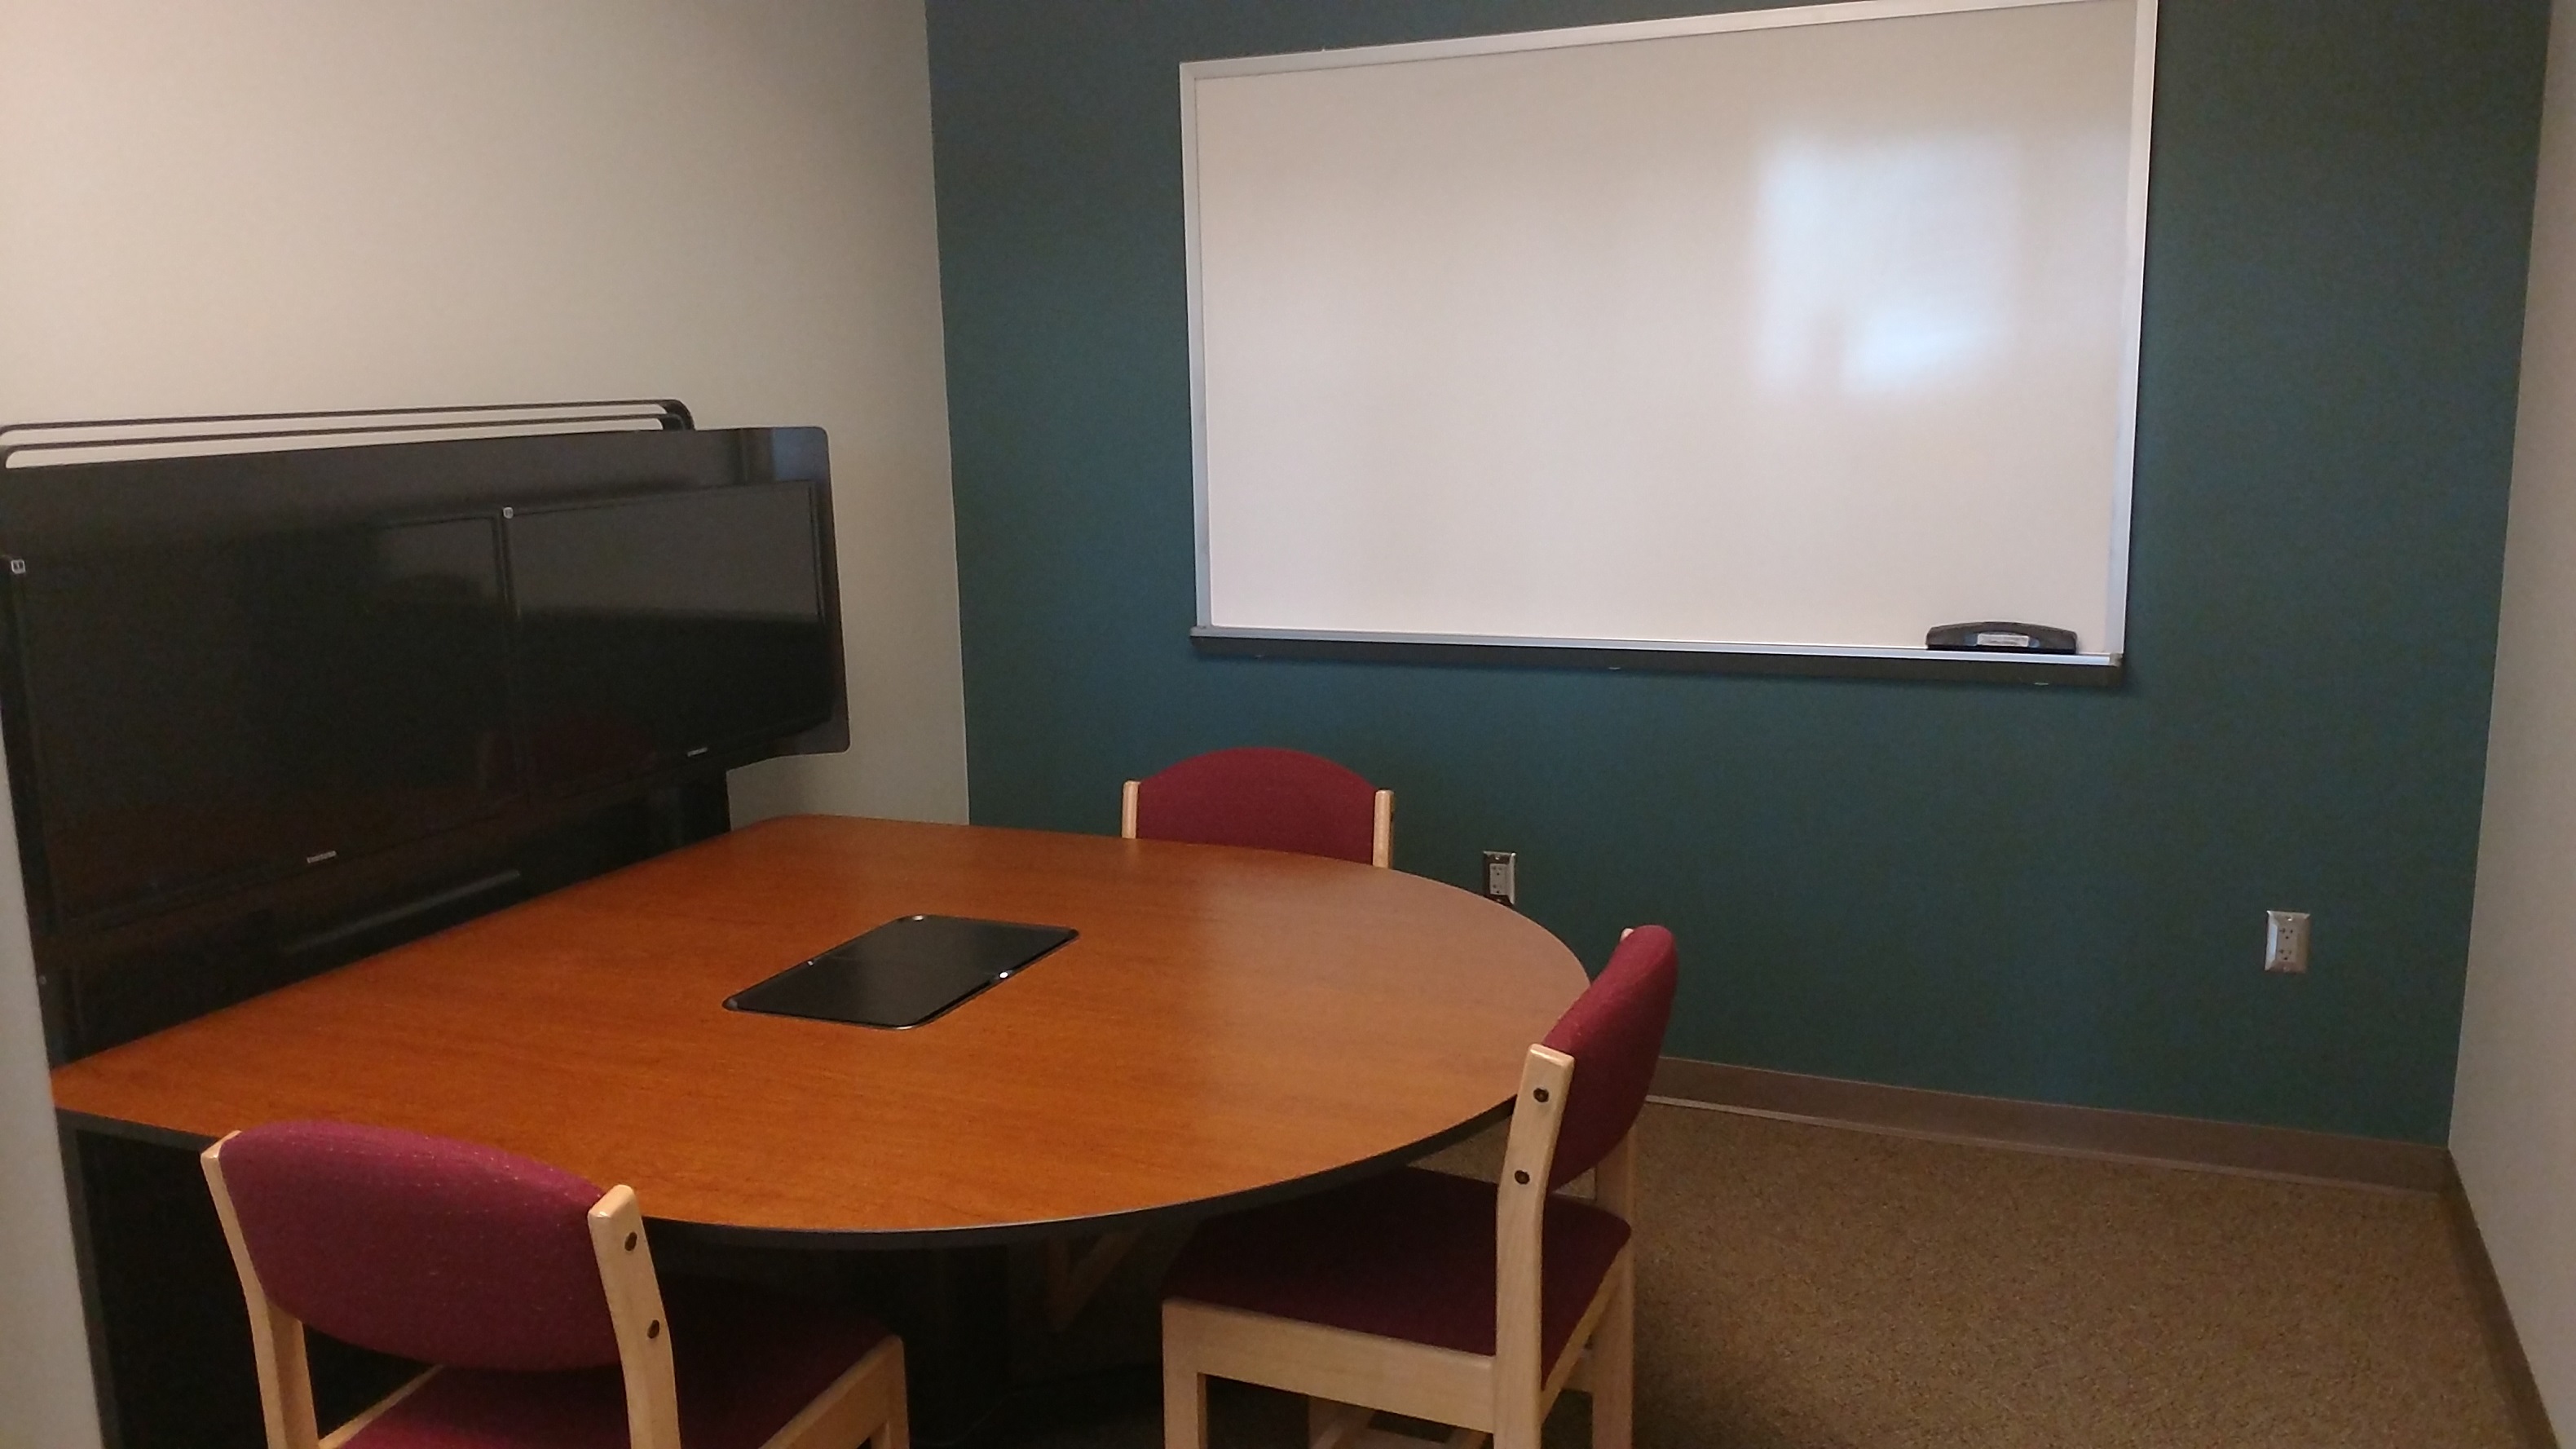 This is a picture of the mediascape study room in the Oak Ridge Library.